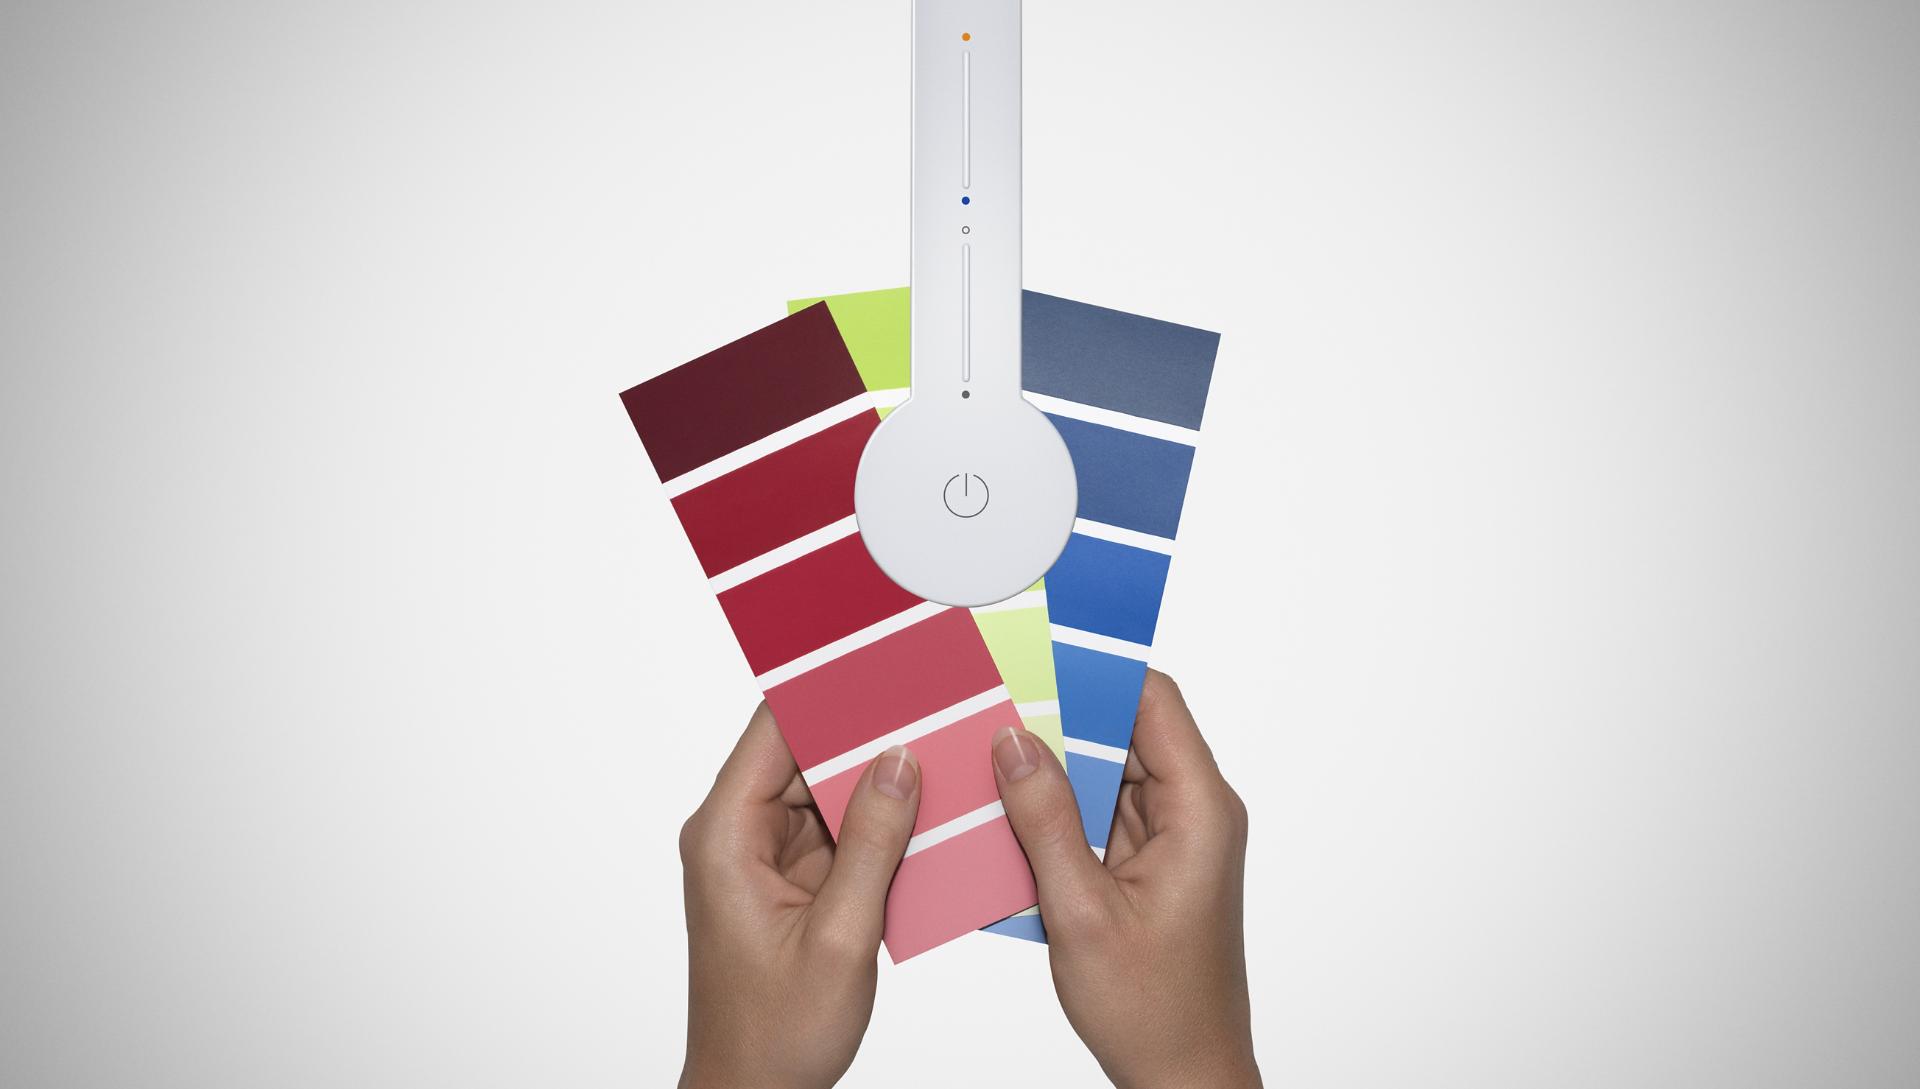 Dyson Lightcycle desk light with colour cards to show its lighting precision